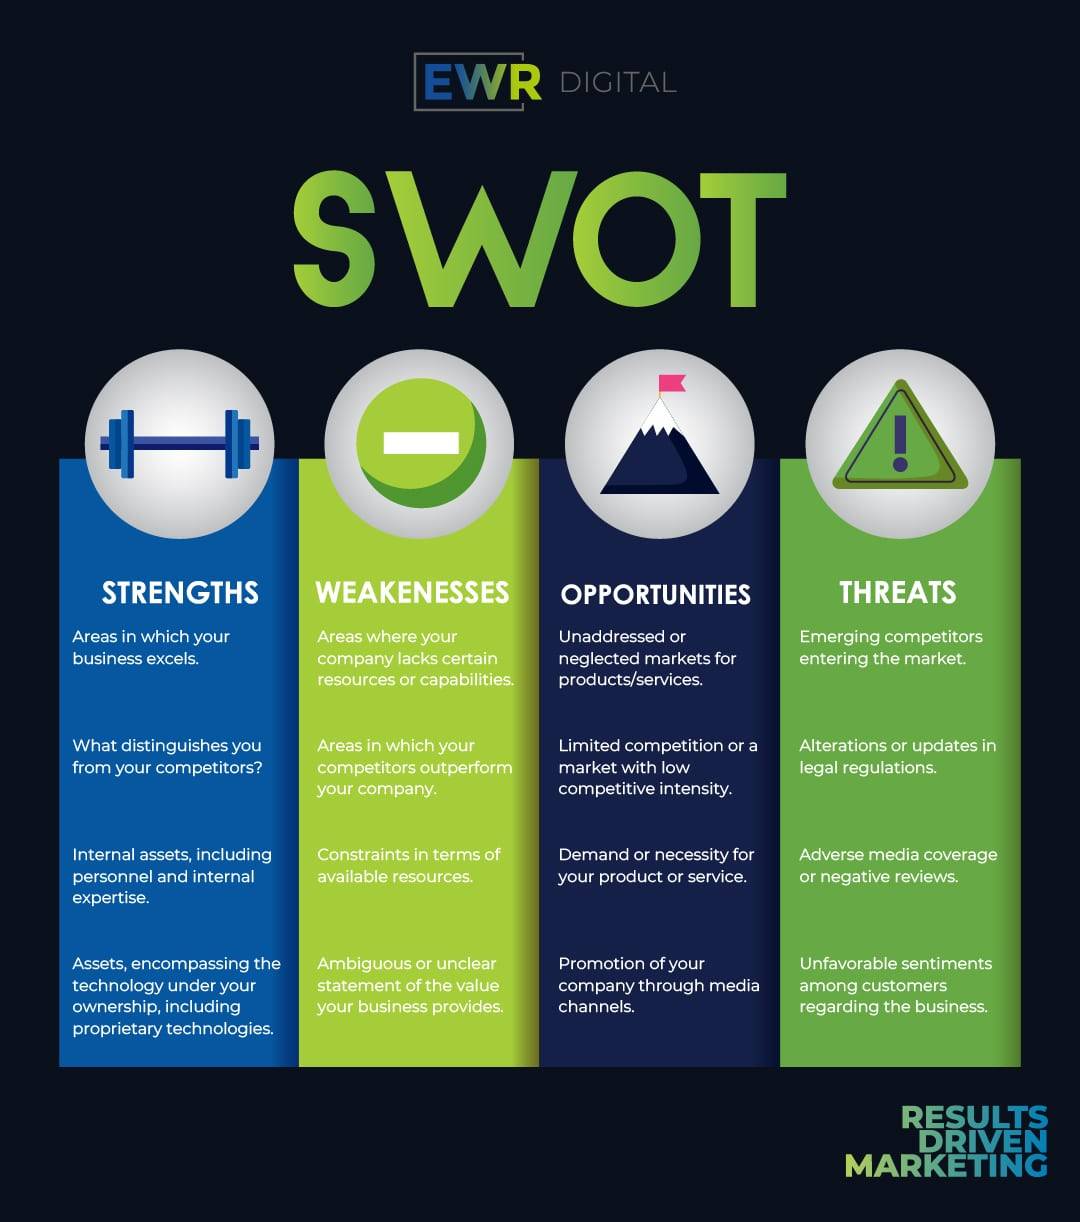 SWOT Analysis: strengths, weaknesses, opportunities, threats